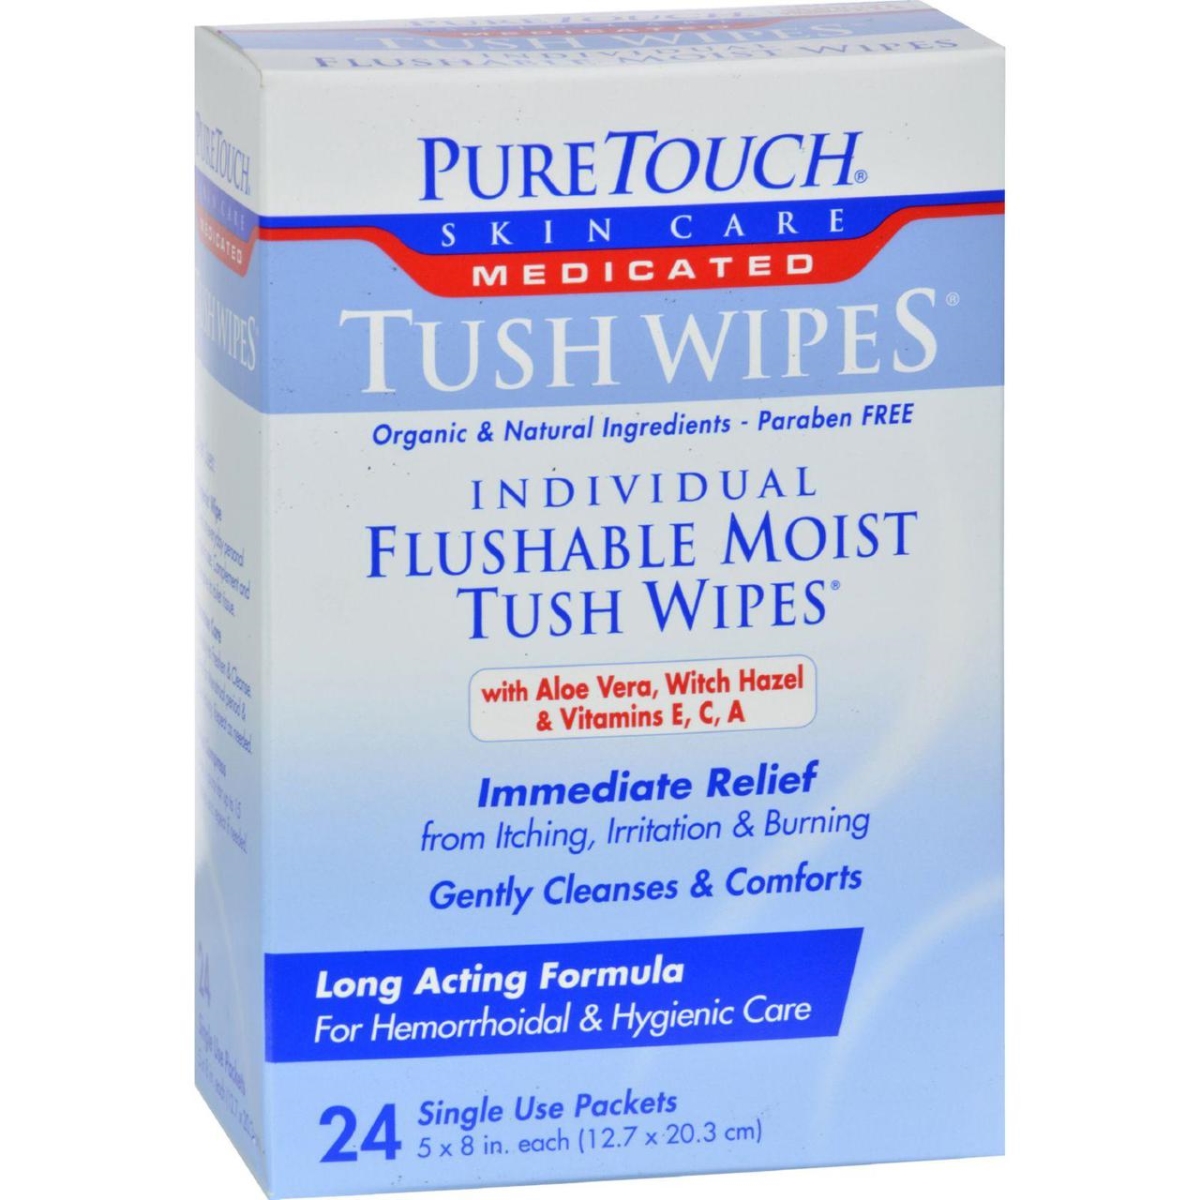 HG0155374 Puretouch Individual Flushable Moist Tush Wipes - 24 Packets